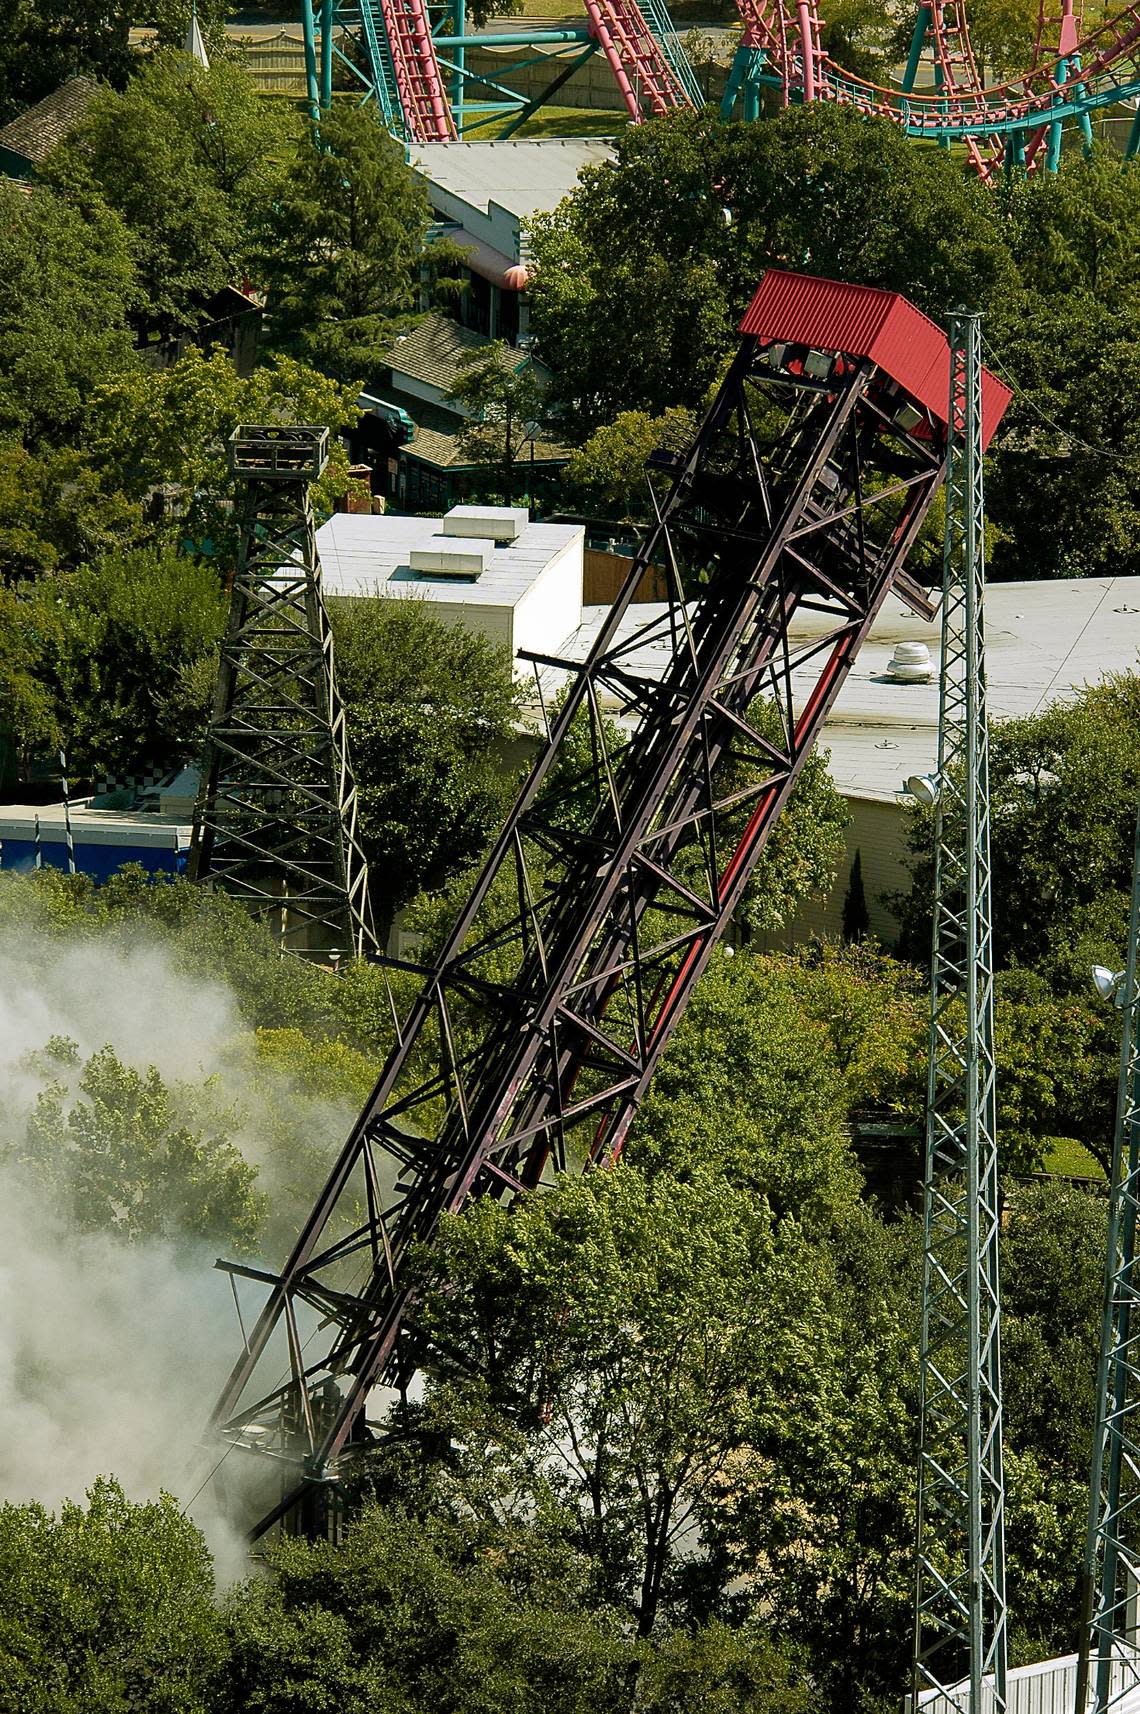 Oct. 2, 2007: The implosion of the Wildcatter ride at Six Flags Over Texas as viewed from the oil derrick tower. The park imploded the ride to make room for its new ride for the 2008 season, the Tony Hawk’s Big Spin ride. The implosion of the 25-year-old, 128-foot Wildcatter was done by Dallas Demolition Co.